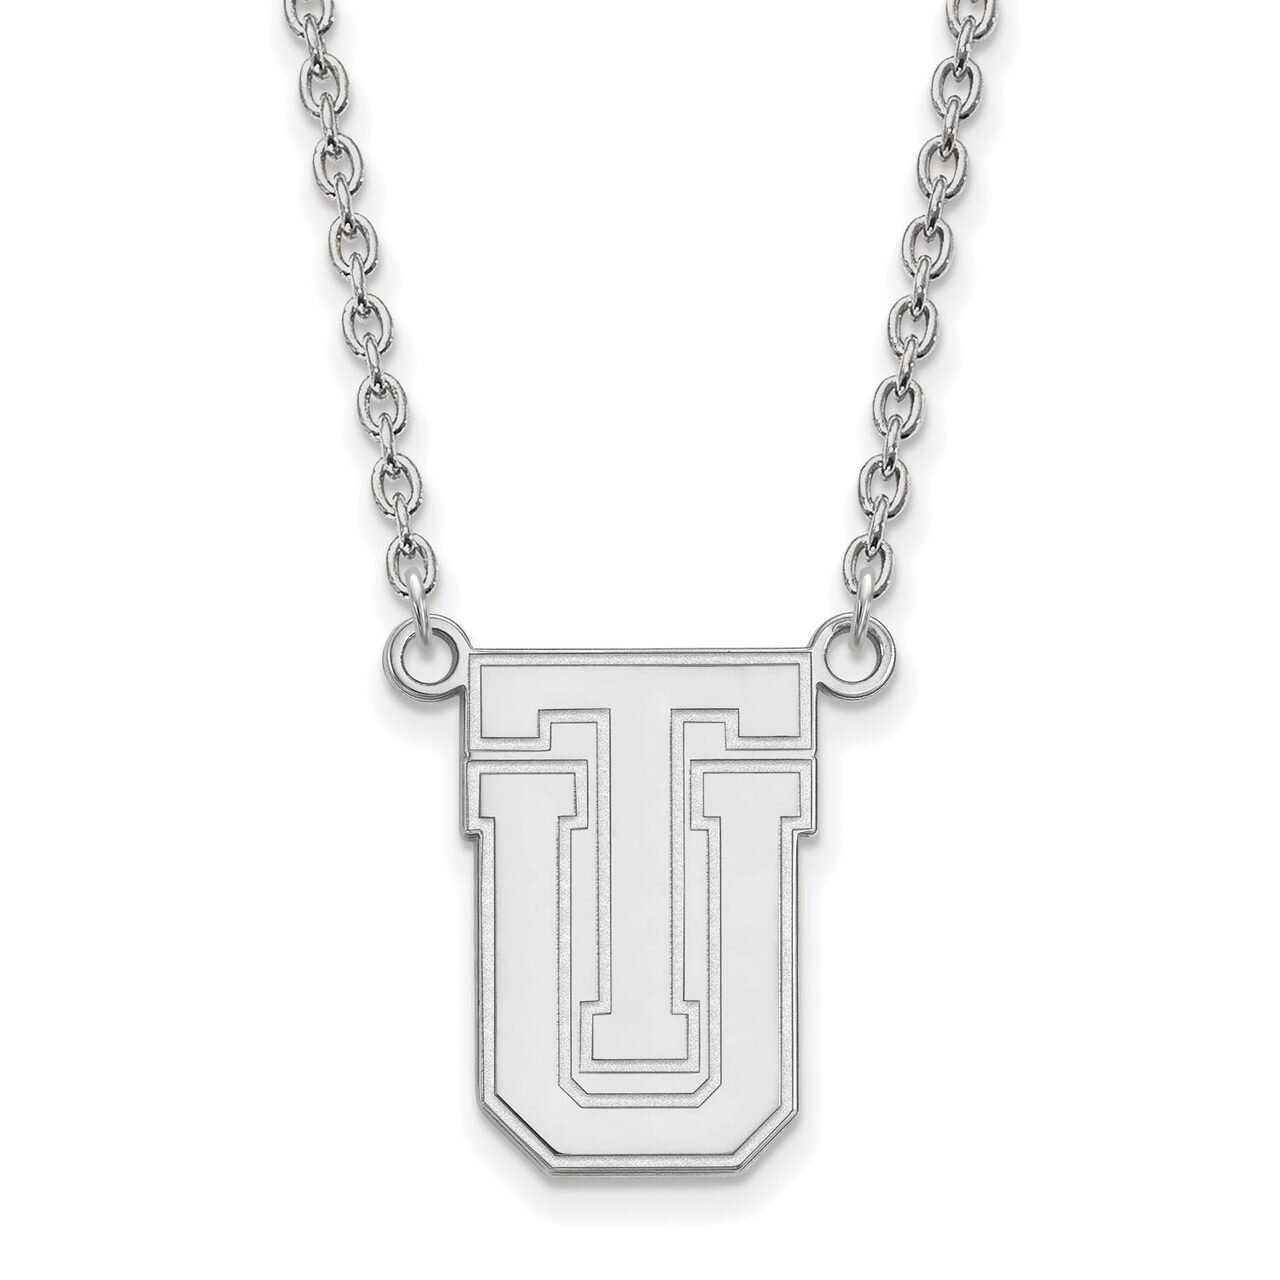 The University of Tulsa Large Pendant with Chain Necklace 10k White Gold 1W009UTL-18